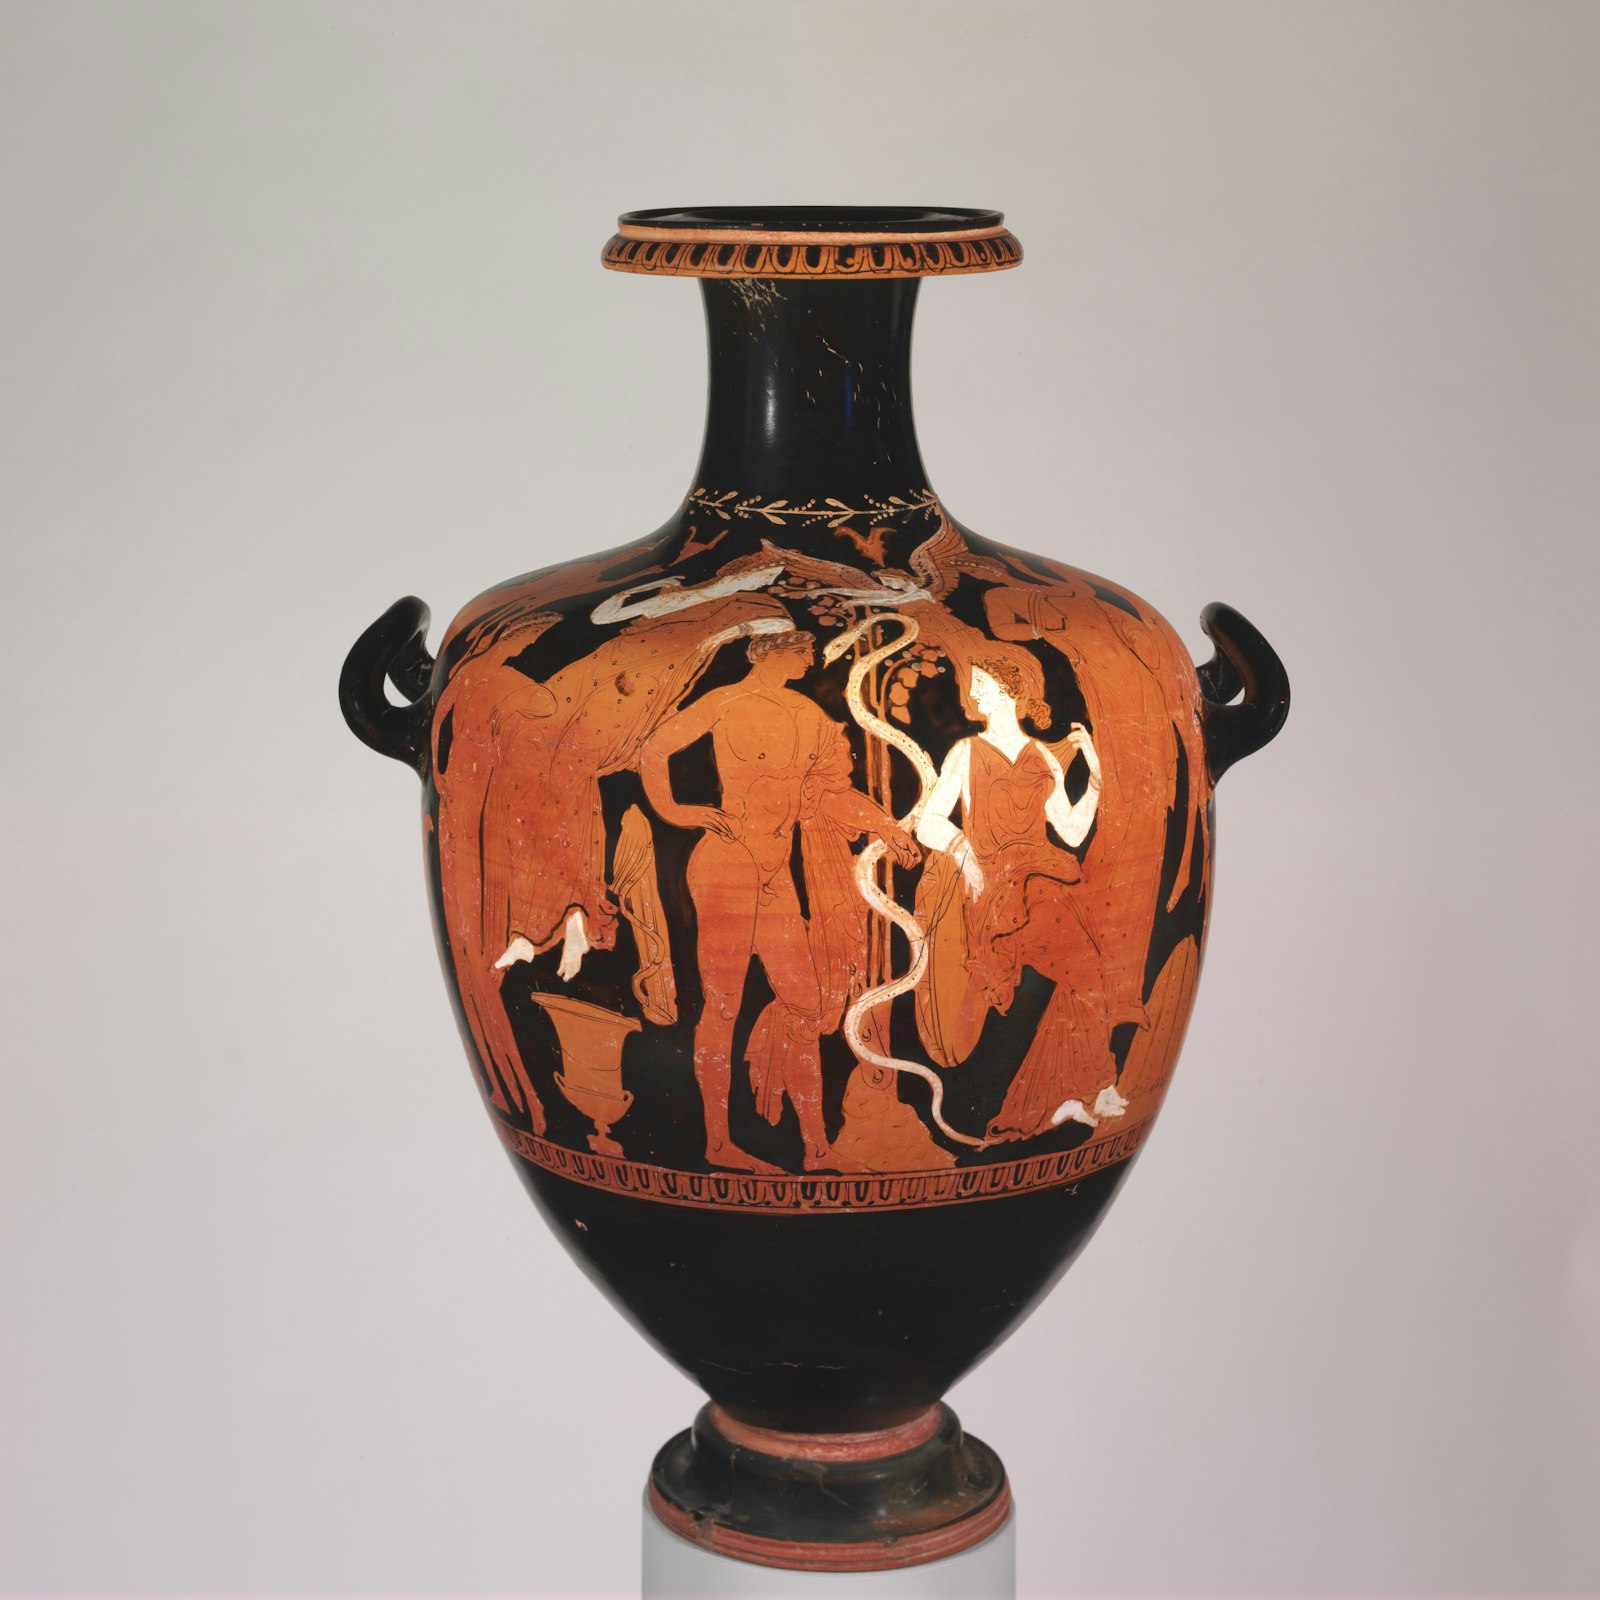 Heracles in garden of Hesperides red-figure hydria by Hesperides painter early fourth century BCE